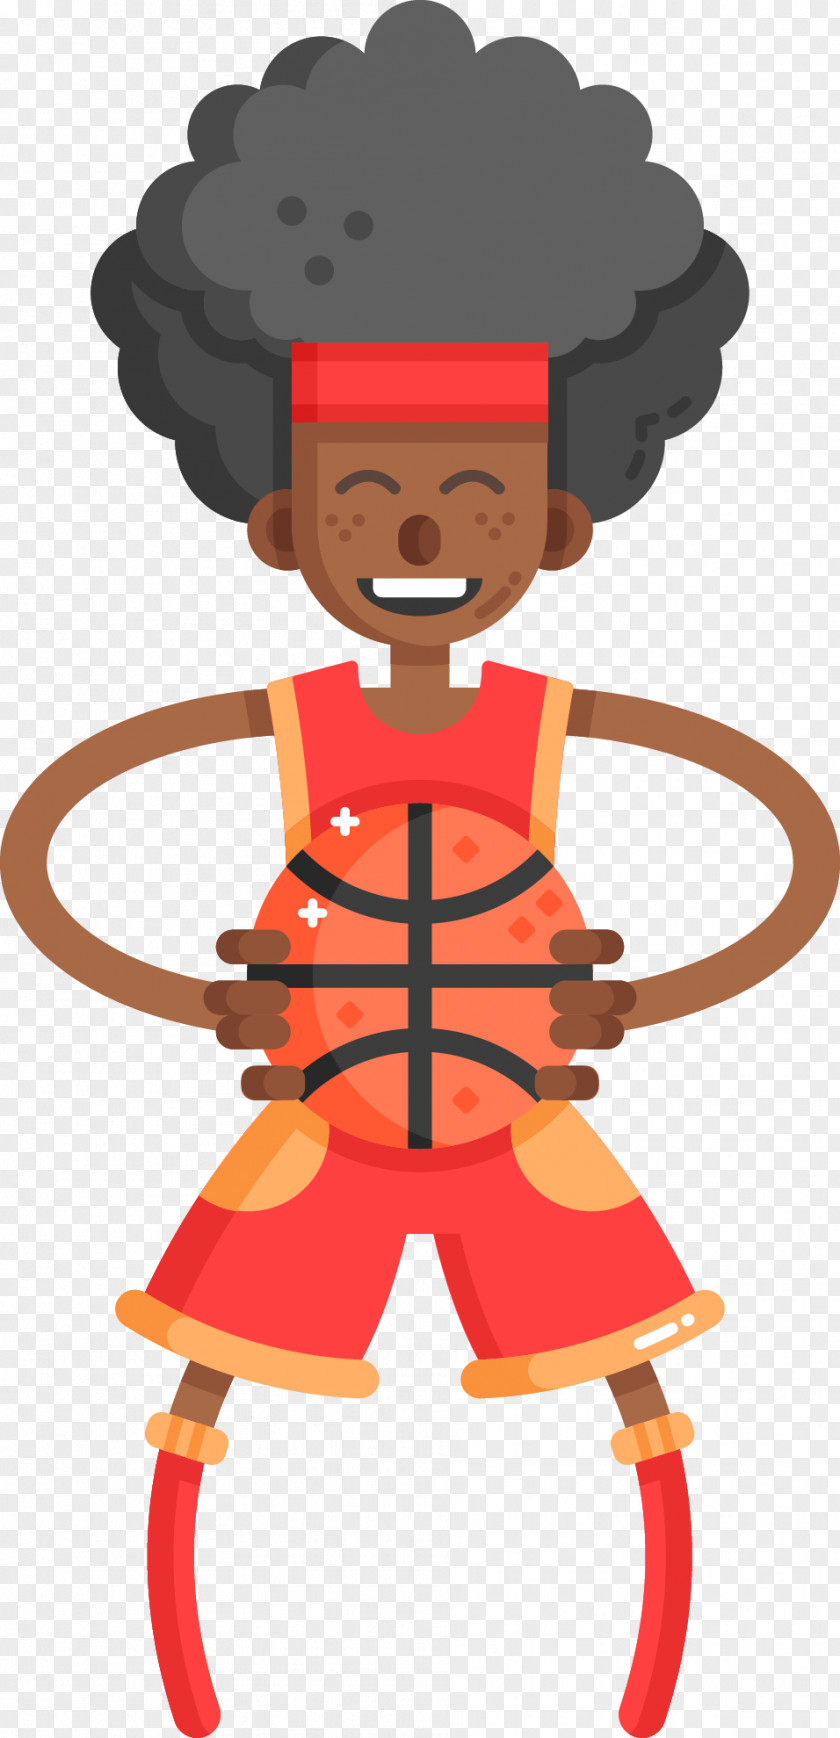 Vector Hand-painted Children Playing Basketball Skylight Streetball Download Illustration PNG